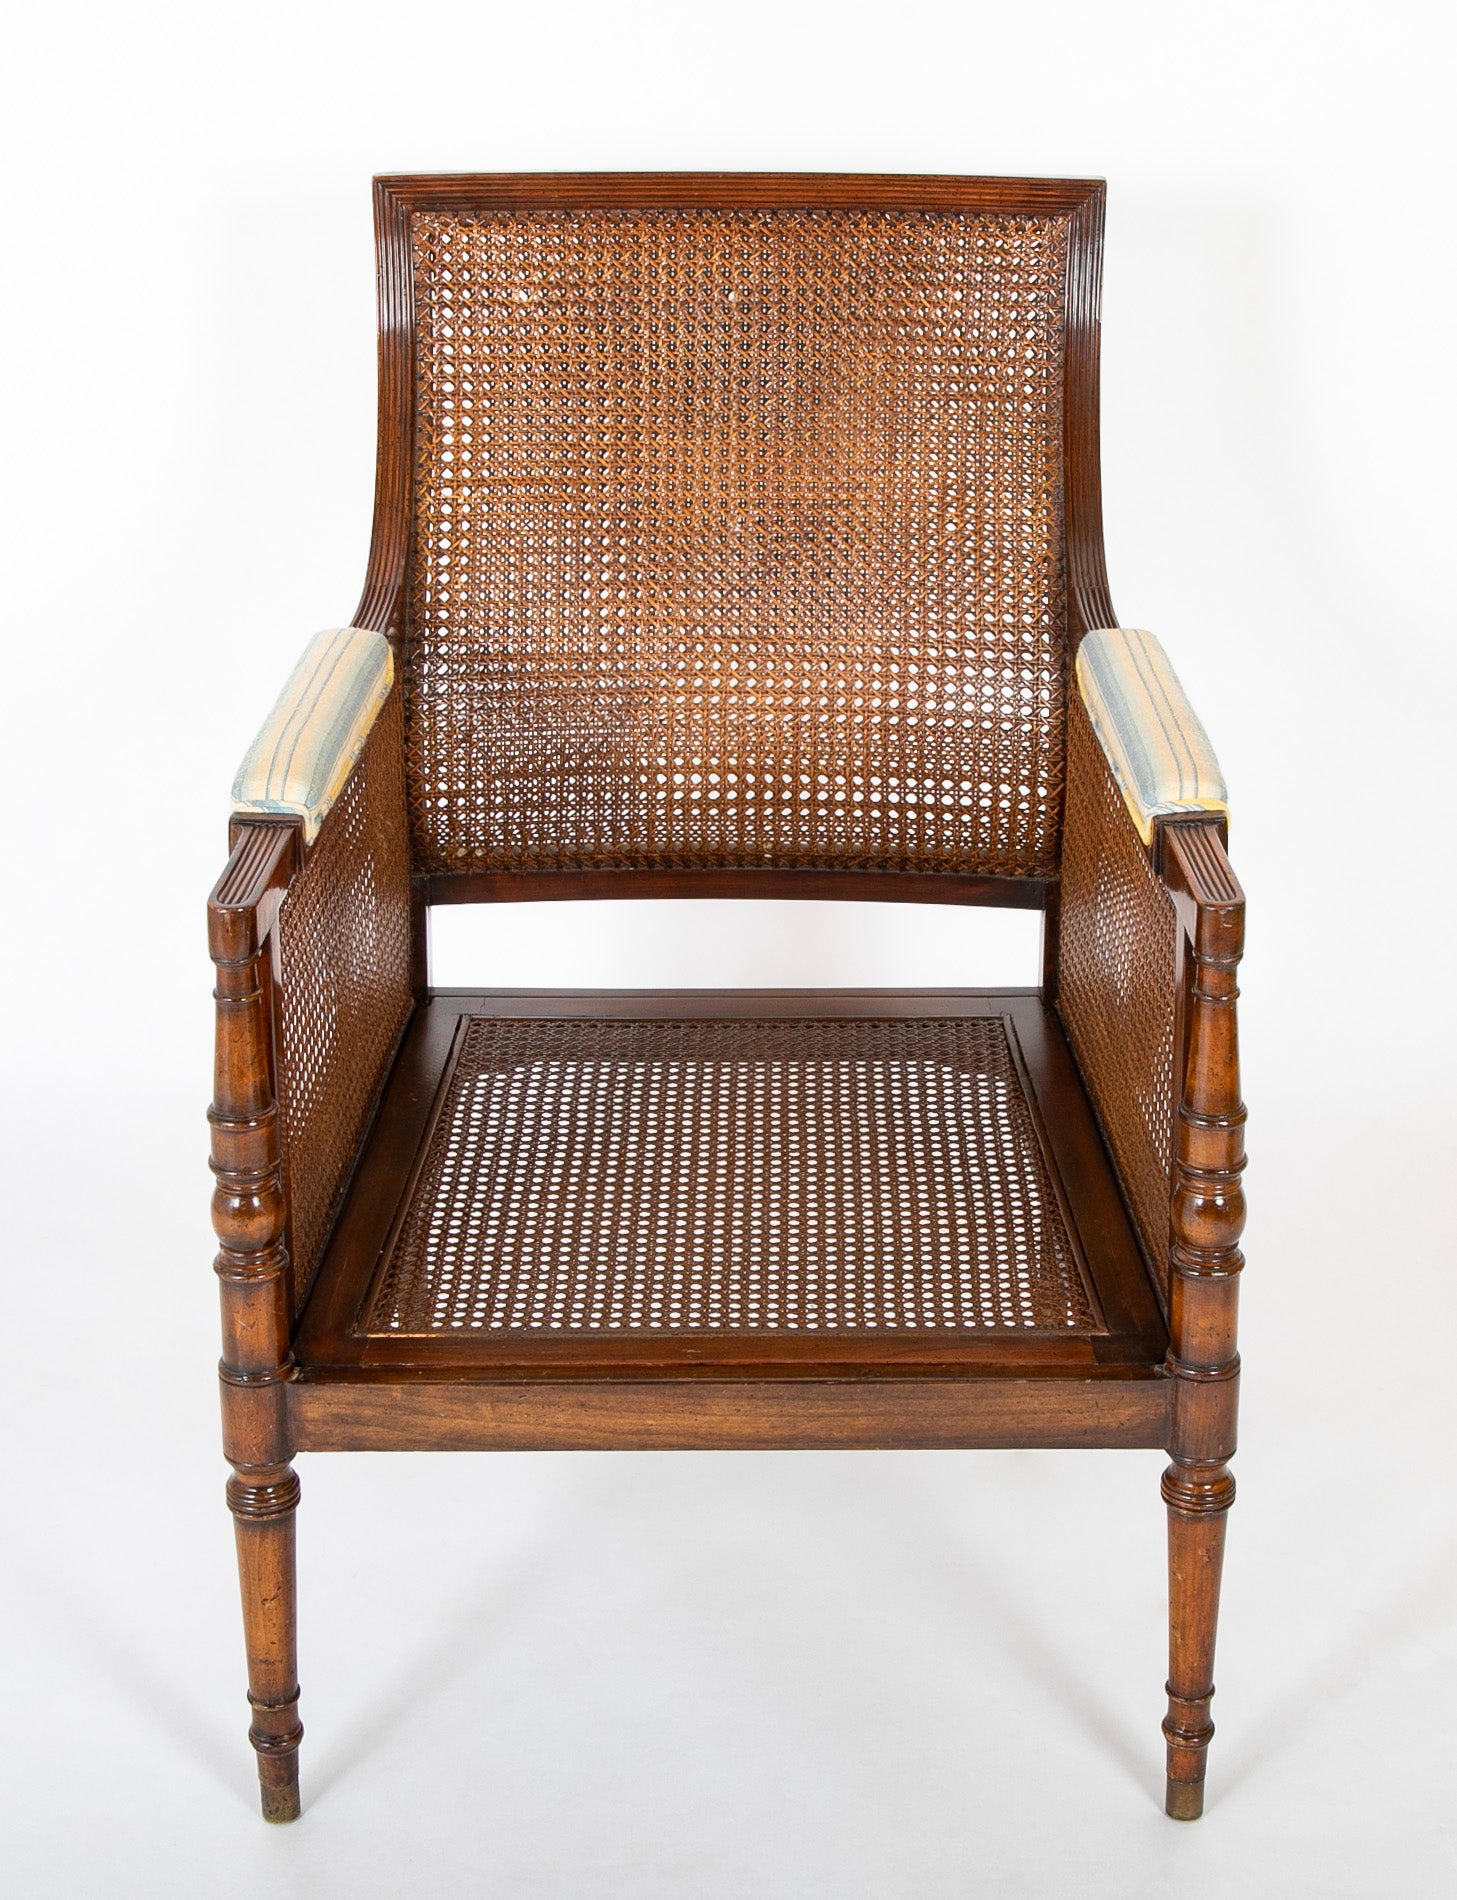 Late 19th Century Regency Caned Library Armchair